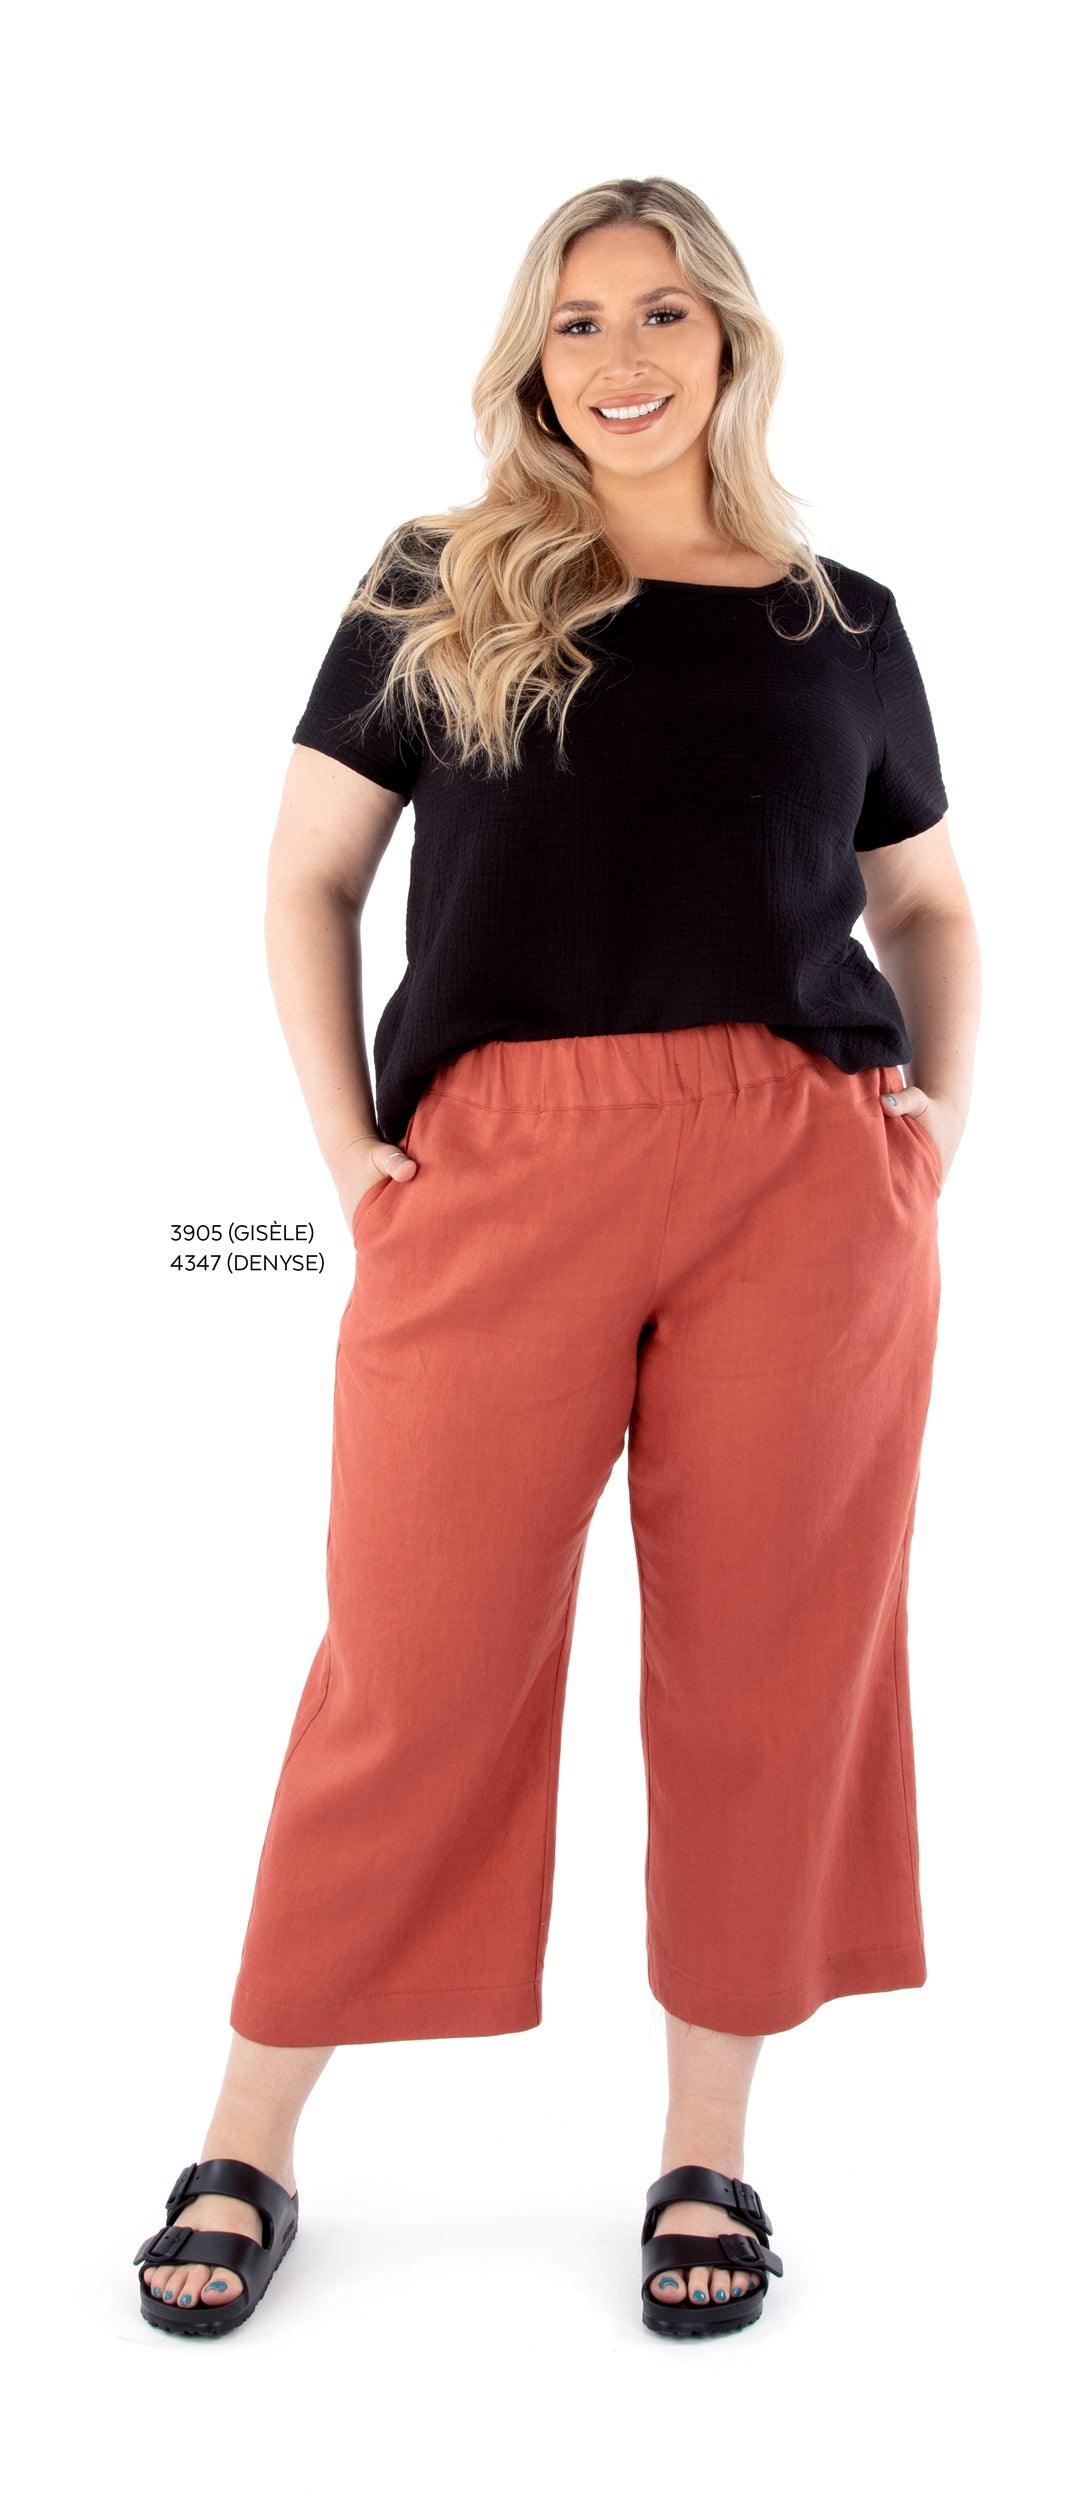 Sewing Pattern Jalie 4347 // DENYSE - Pull-on woven pants and shorts